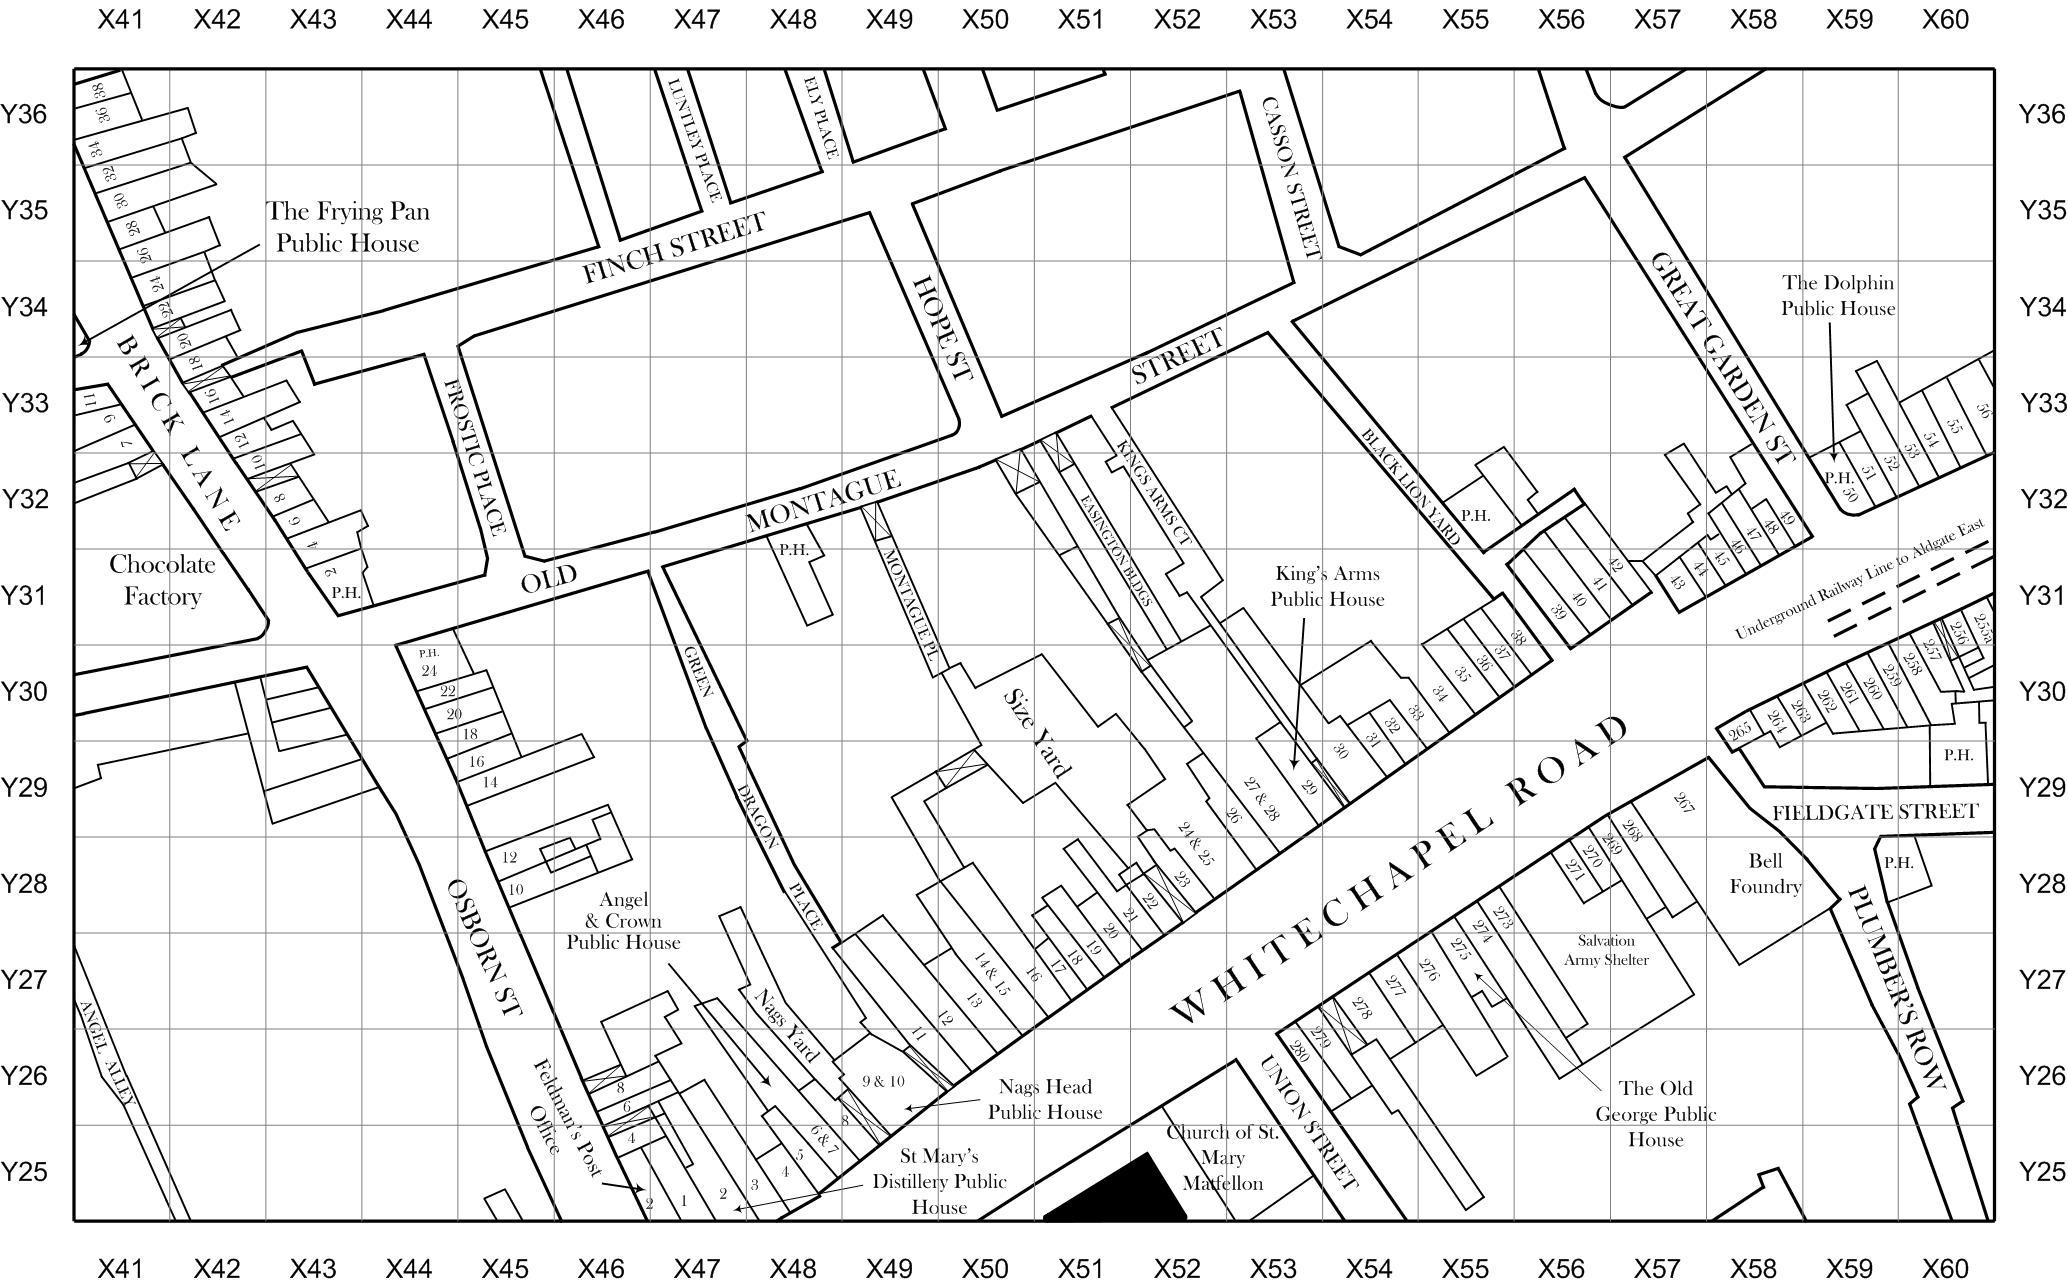 Jack the Ripper map of Spitalfields and Whitechapel 1888 section 13